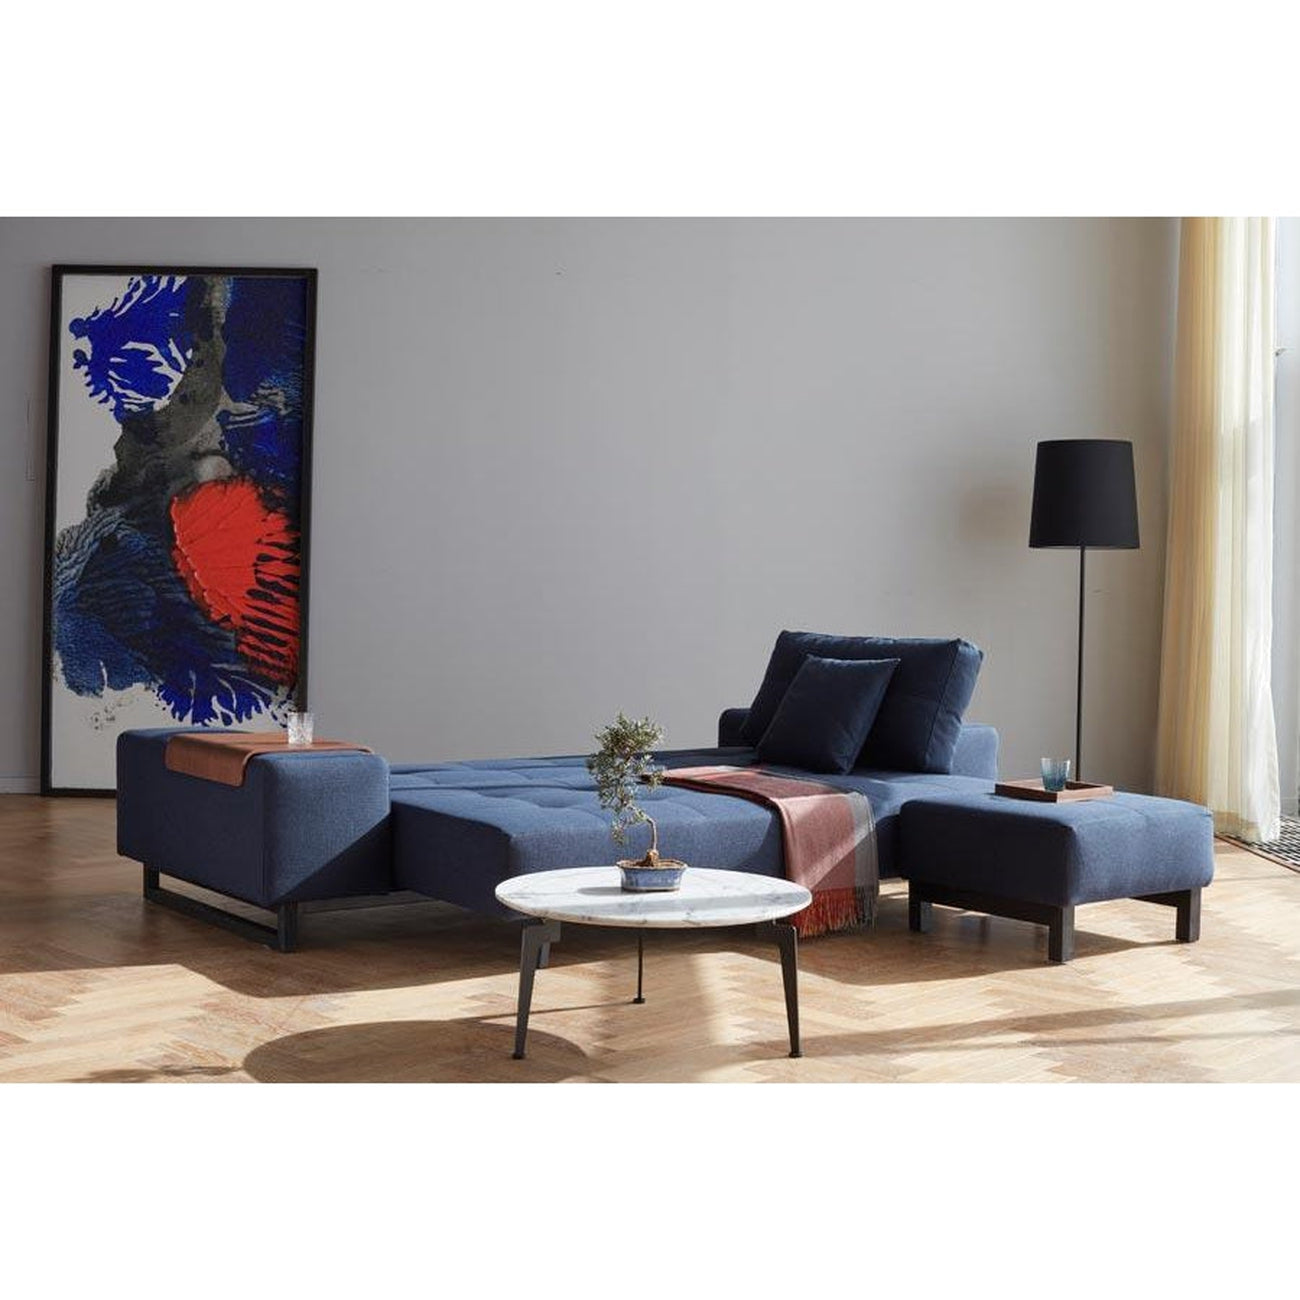 Grand D.E.L sofa BLACK WOOD (QUEEN)-Innovation Living-INNO-94-748190527-3-SofasMixed Dance Natural-2-France and Son